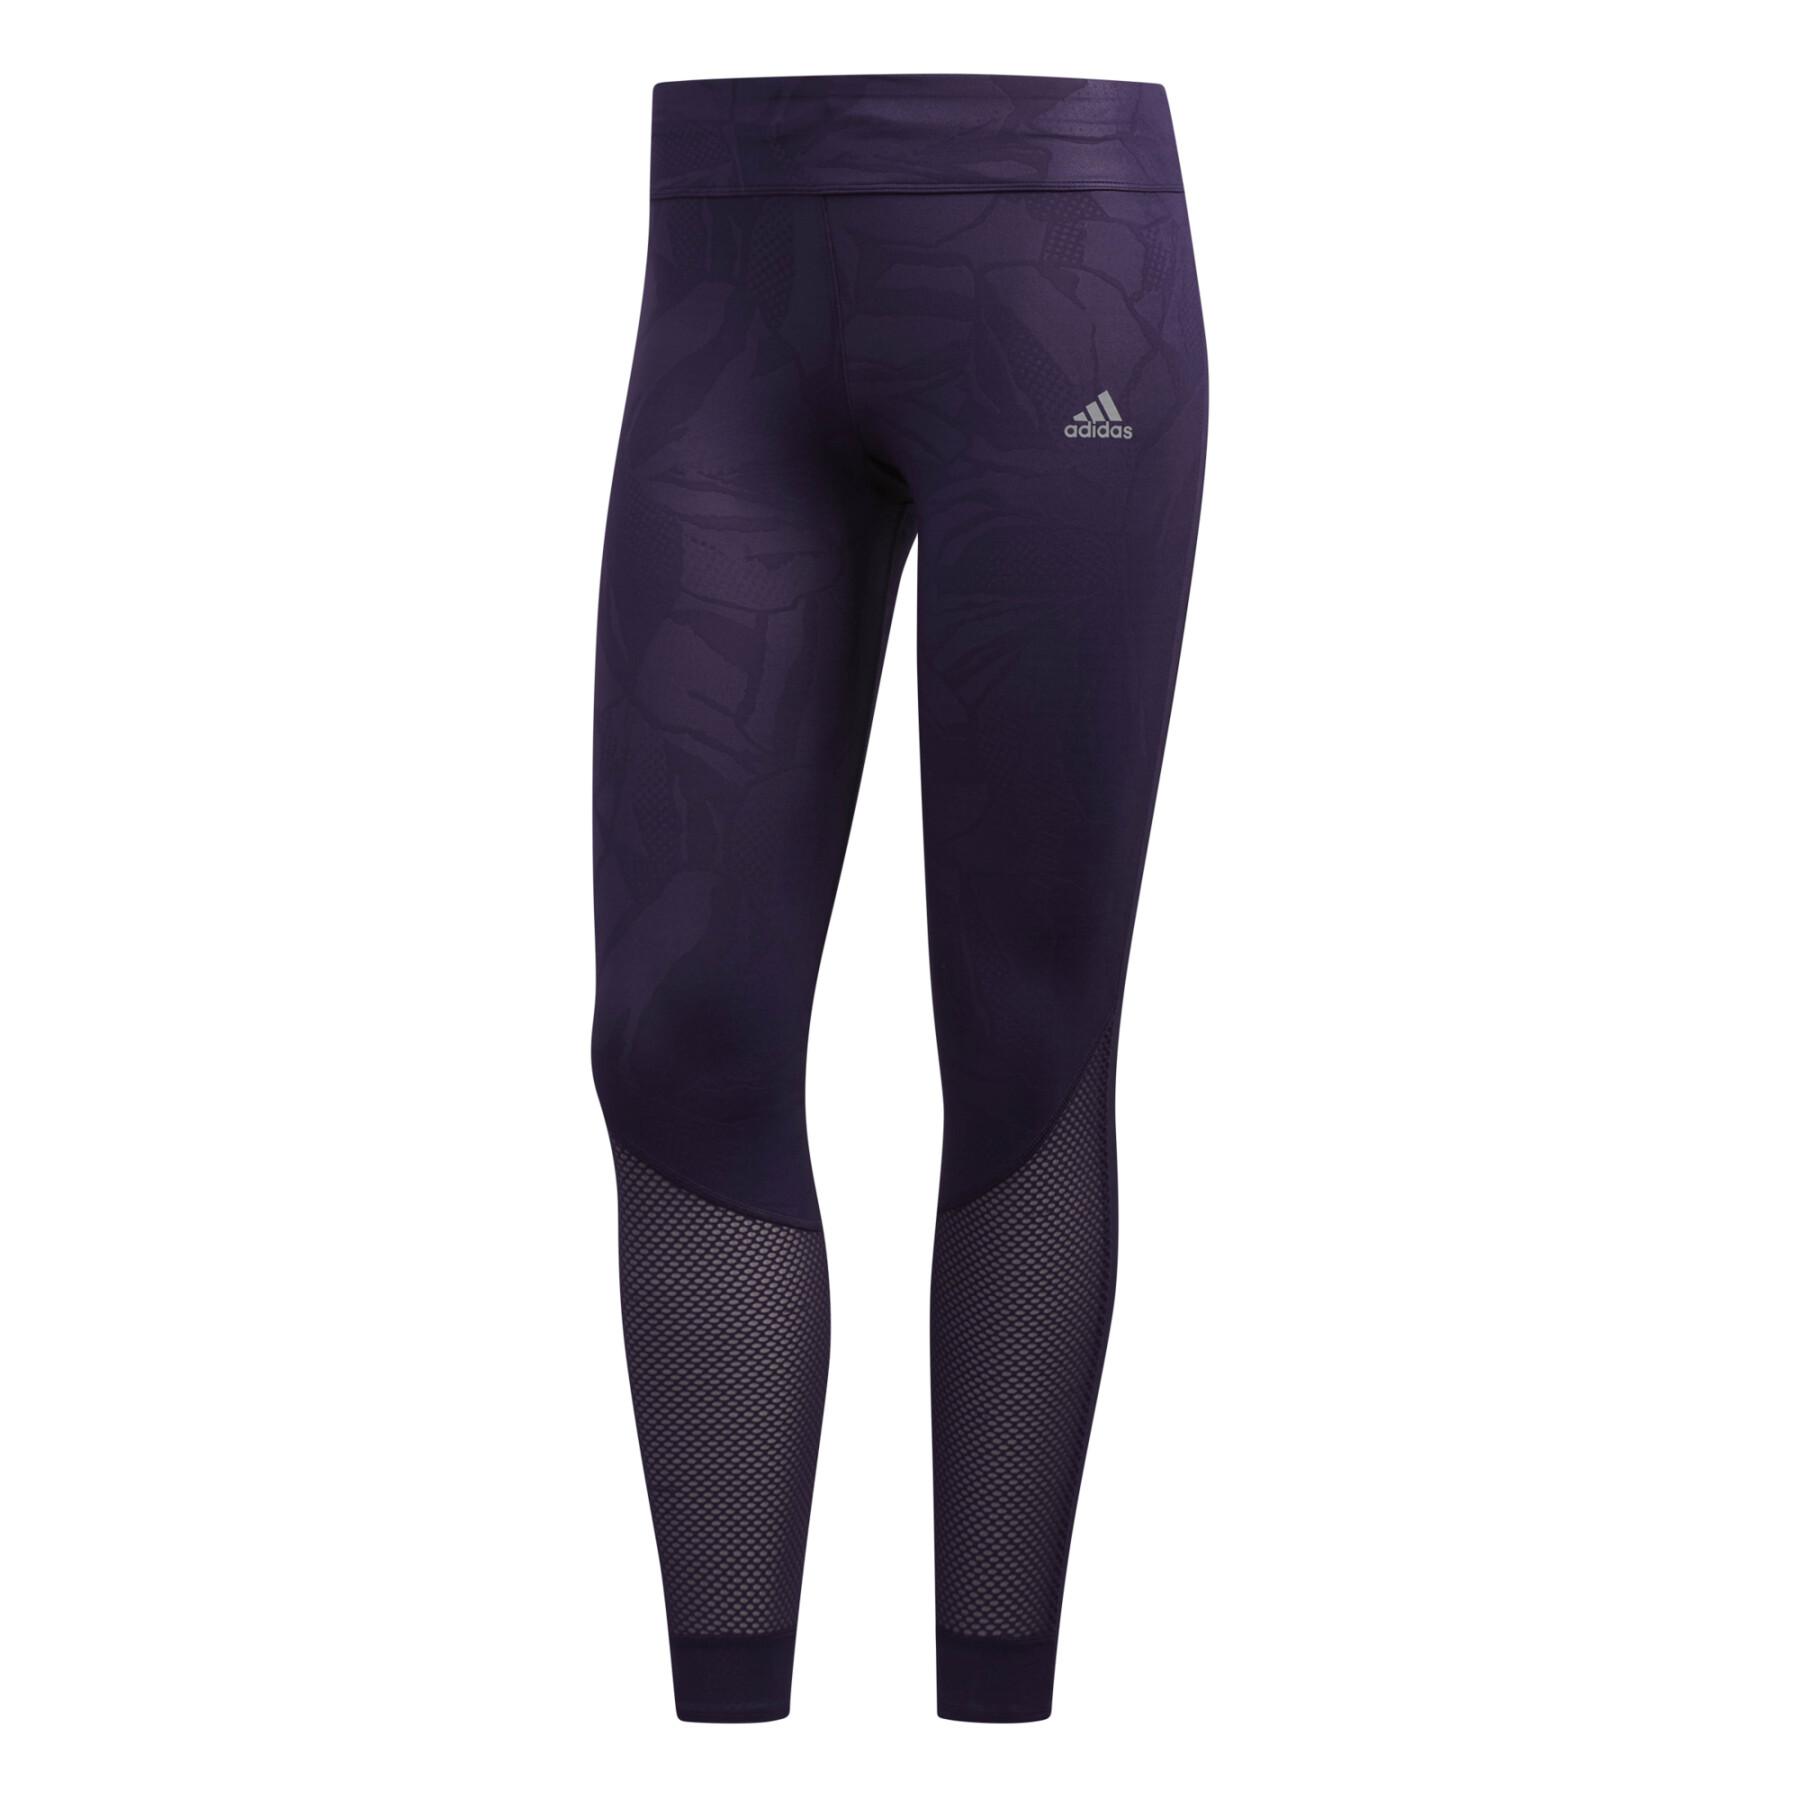 Legging mulher adidas 7/8 Own the Run Paper Floral